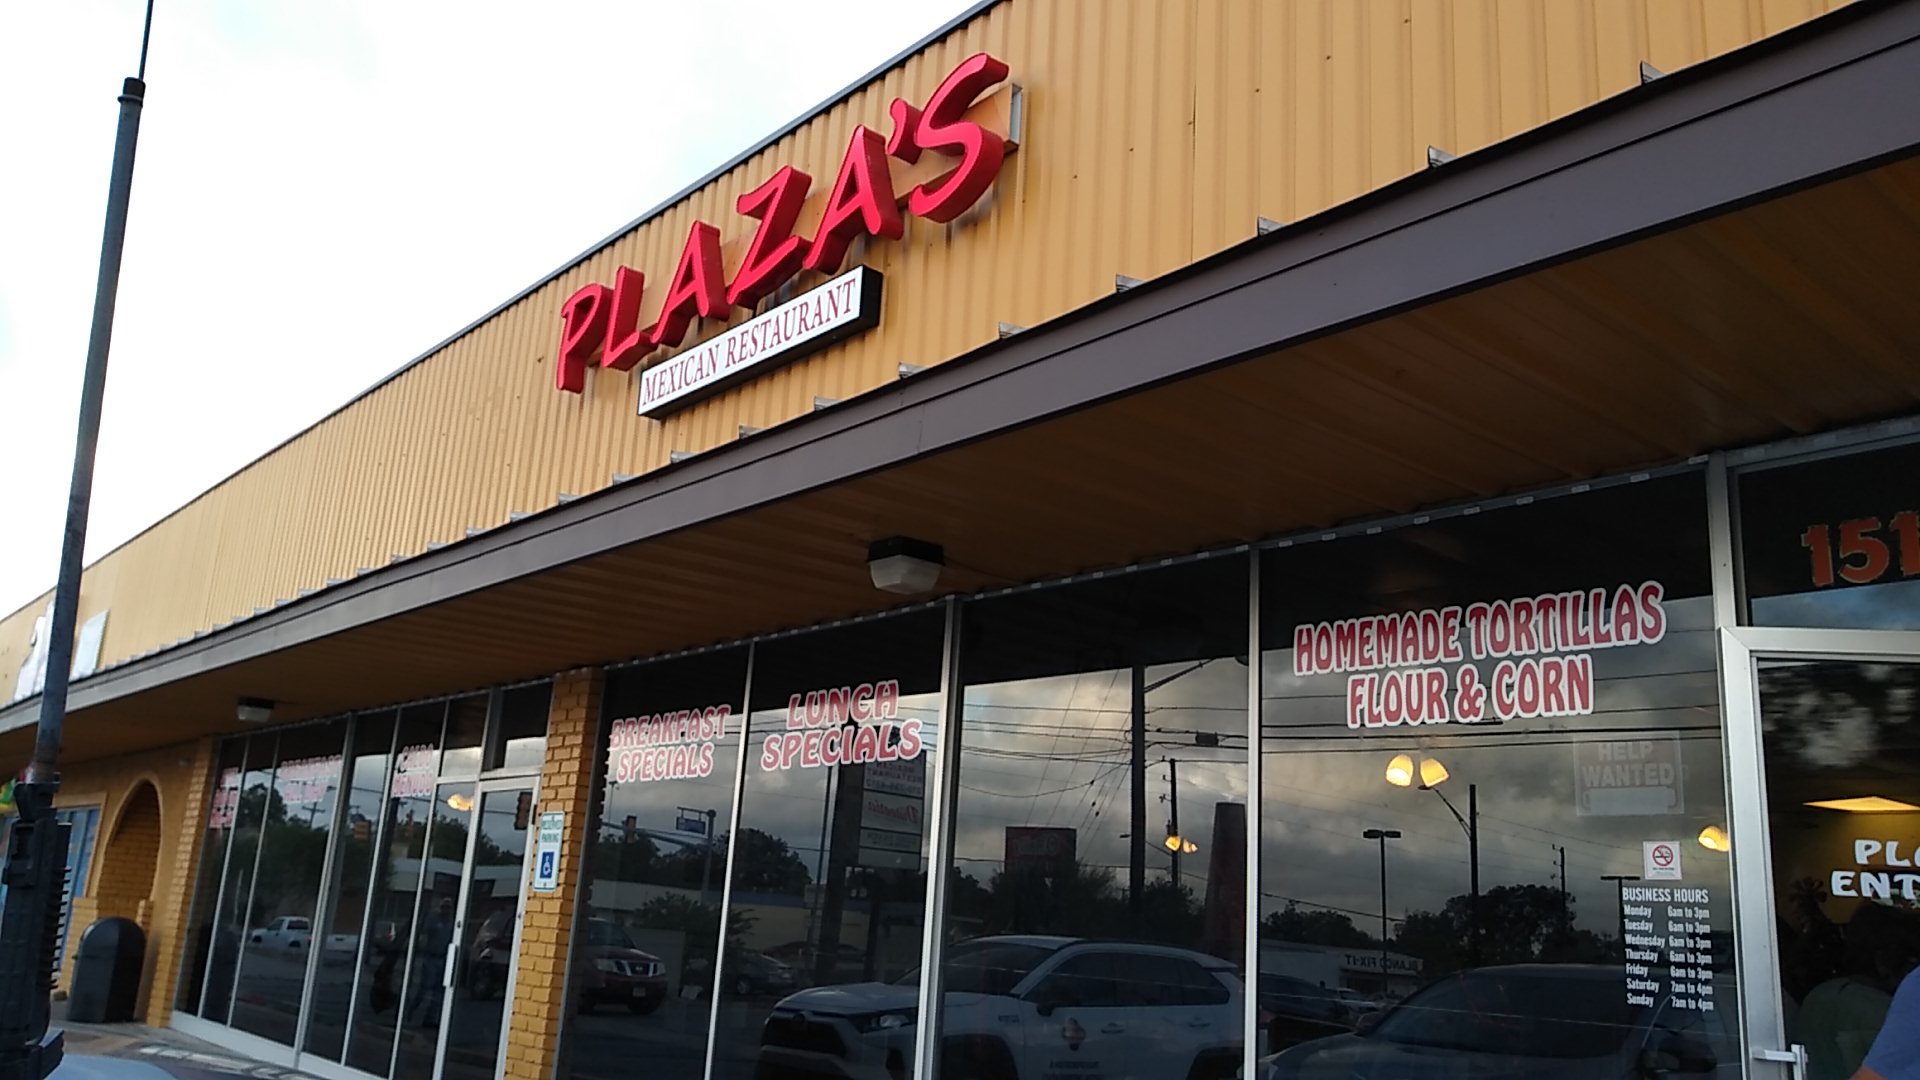 Plaza’s Mexican Restaurant